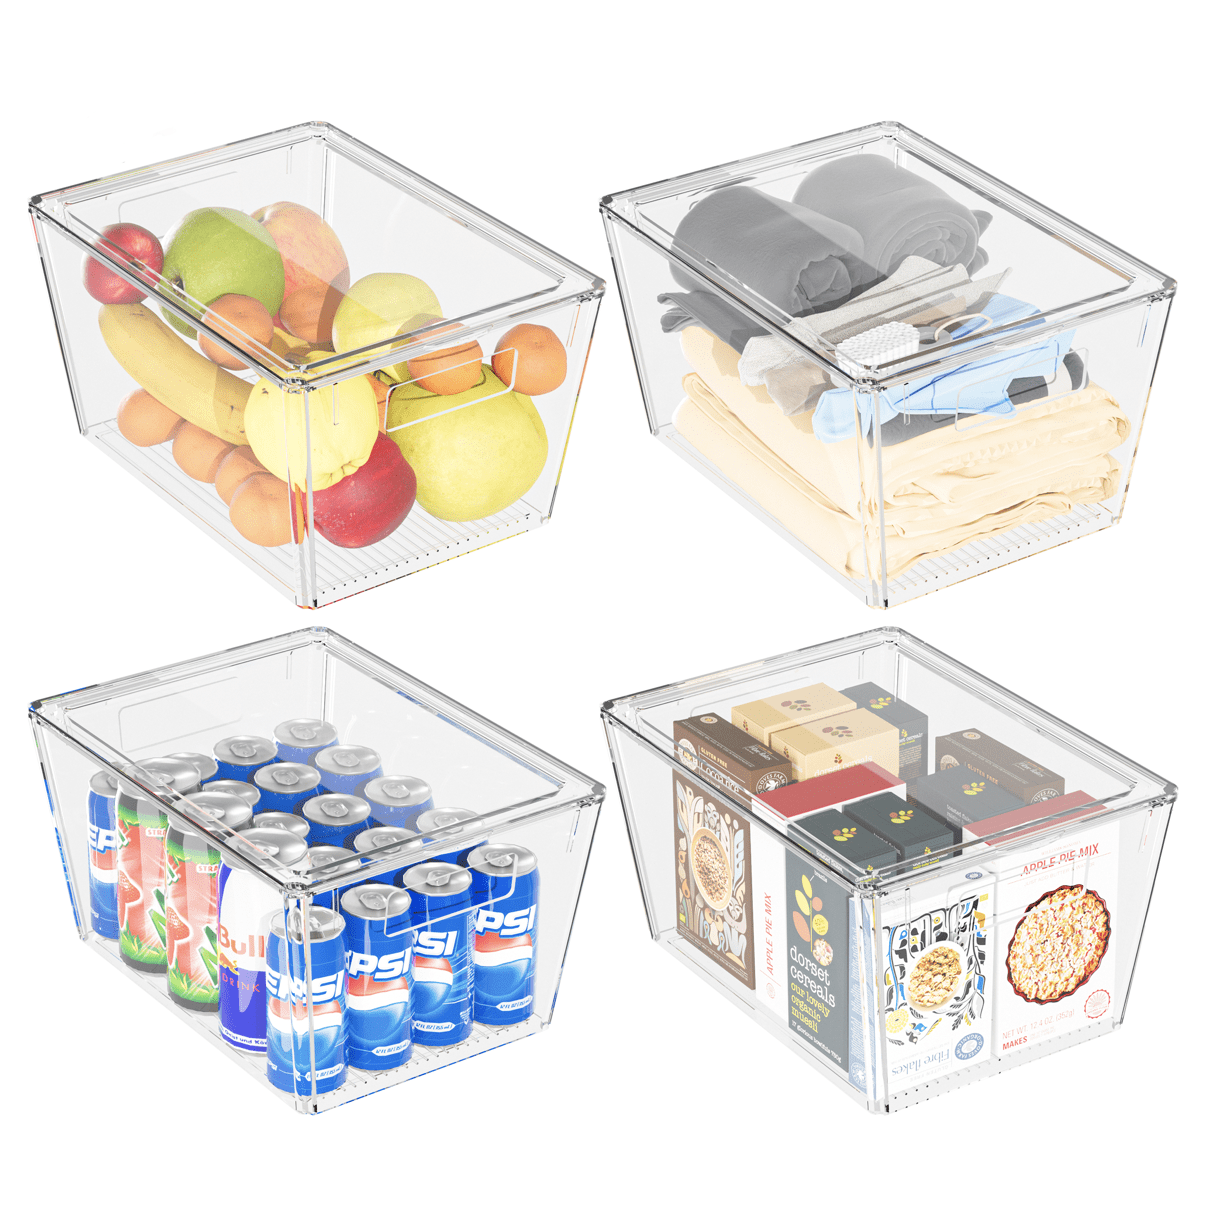 FRCOLOR 4Pcs plastic organizer bins index card holder snack containers for  plastic storage bins with storage bins with lids small food containers